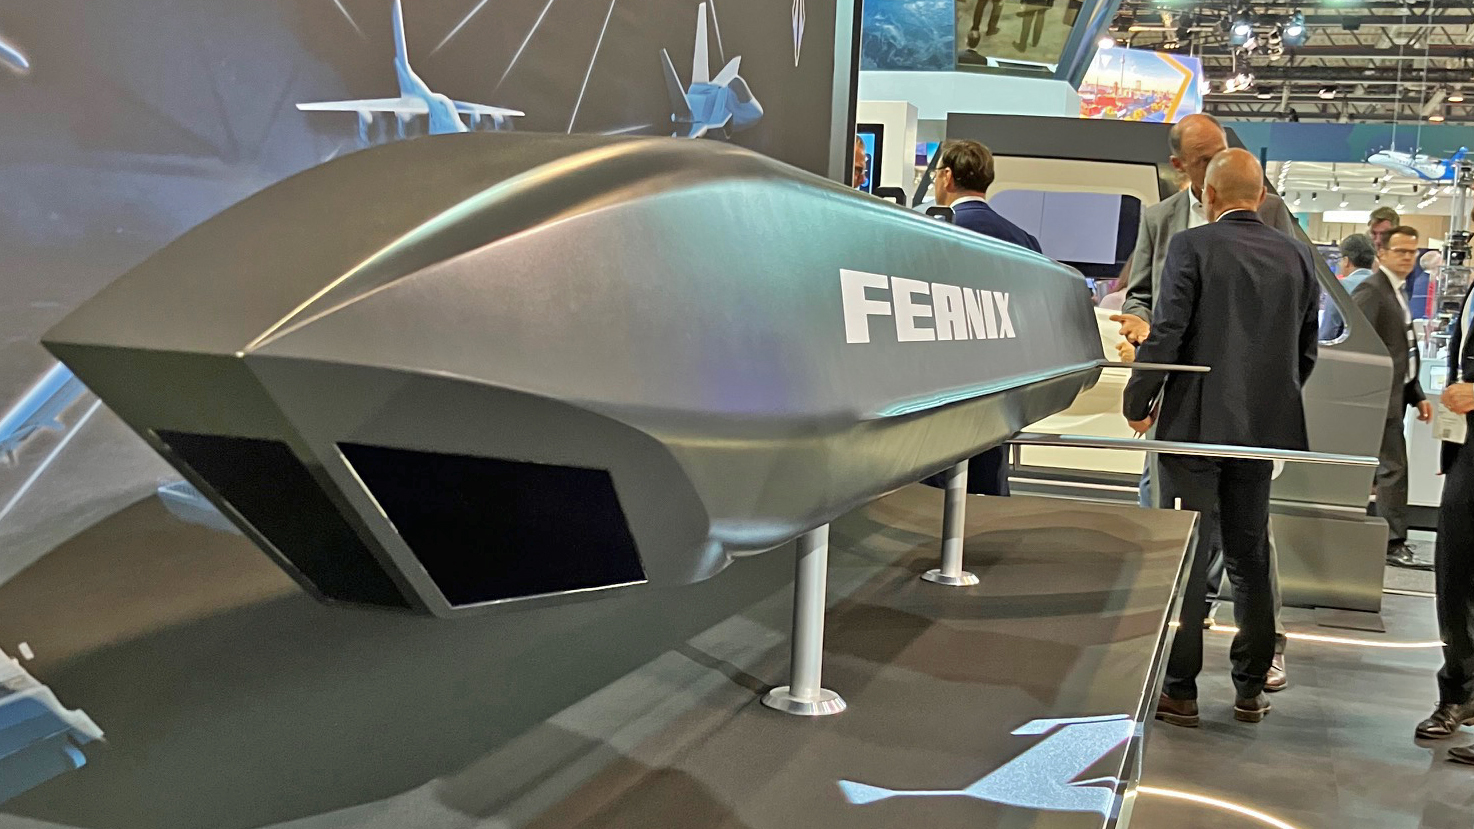 German contractor Diehl Defense has unveiled a new “remote carrier” — a long-range effector that can be launched from aircraft, as well as from land and sea platforms. The missile-like store, known as FEANIX, which stands for Future Effector — Adaptable, Networked, Intelligent, eXpendable, is being pitched as an adjunct to the pan-European Future Combat Air System (FCAS) next-generation air combat program, as well as for the in-service Eurofighter Typhoon.